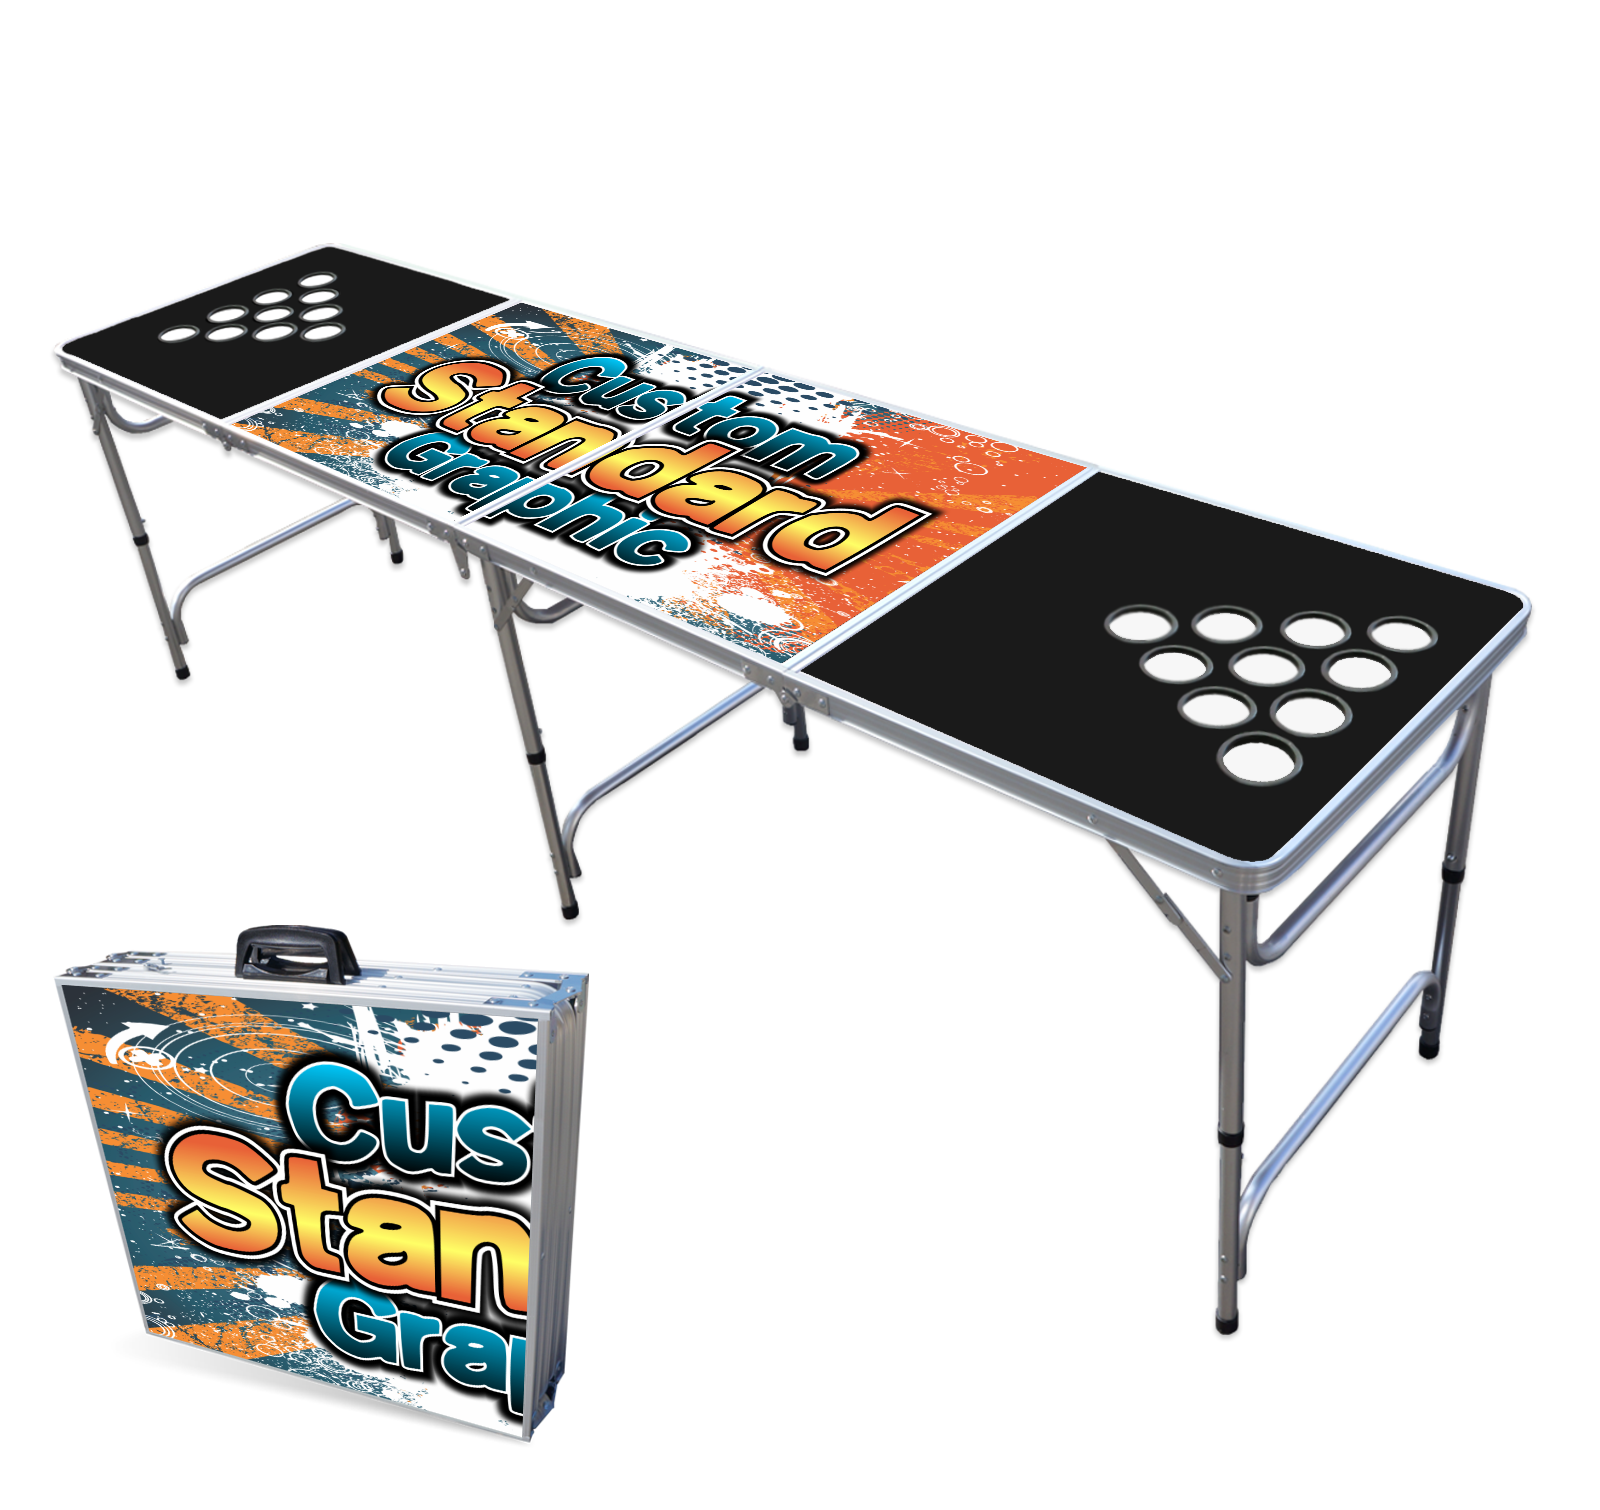 LED Beer Pong Table - The Arcade People